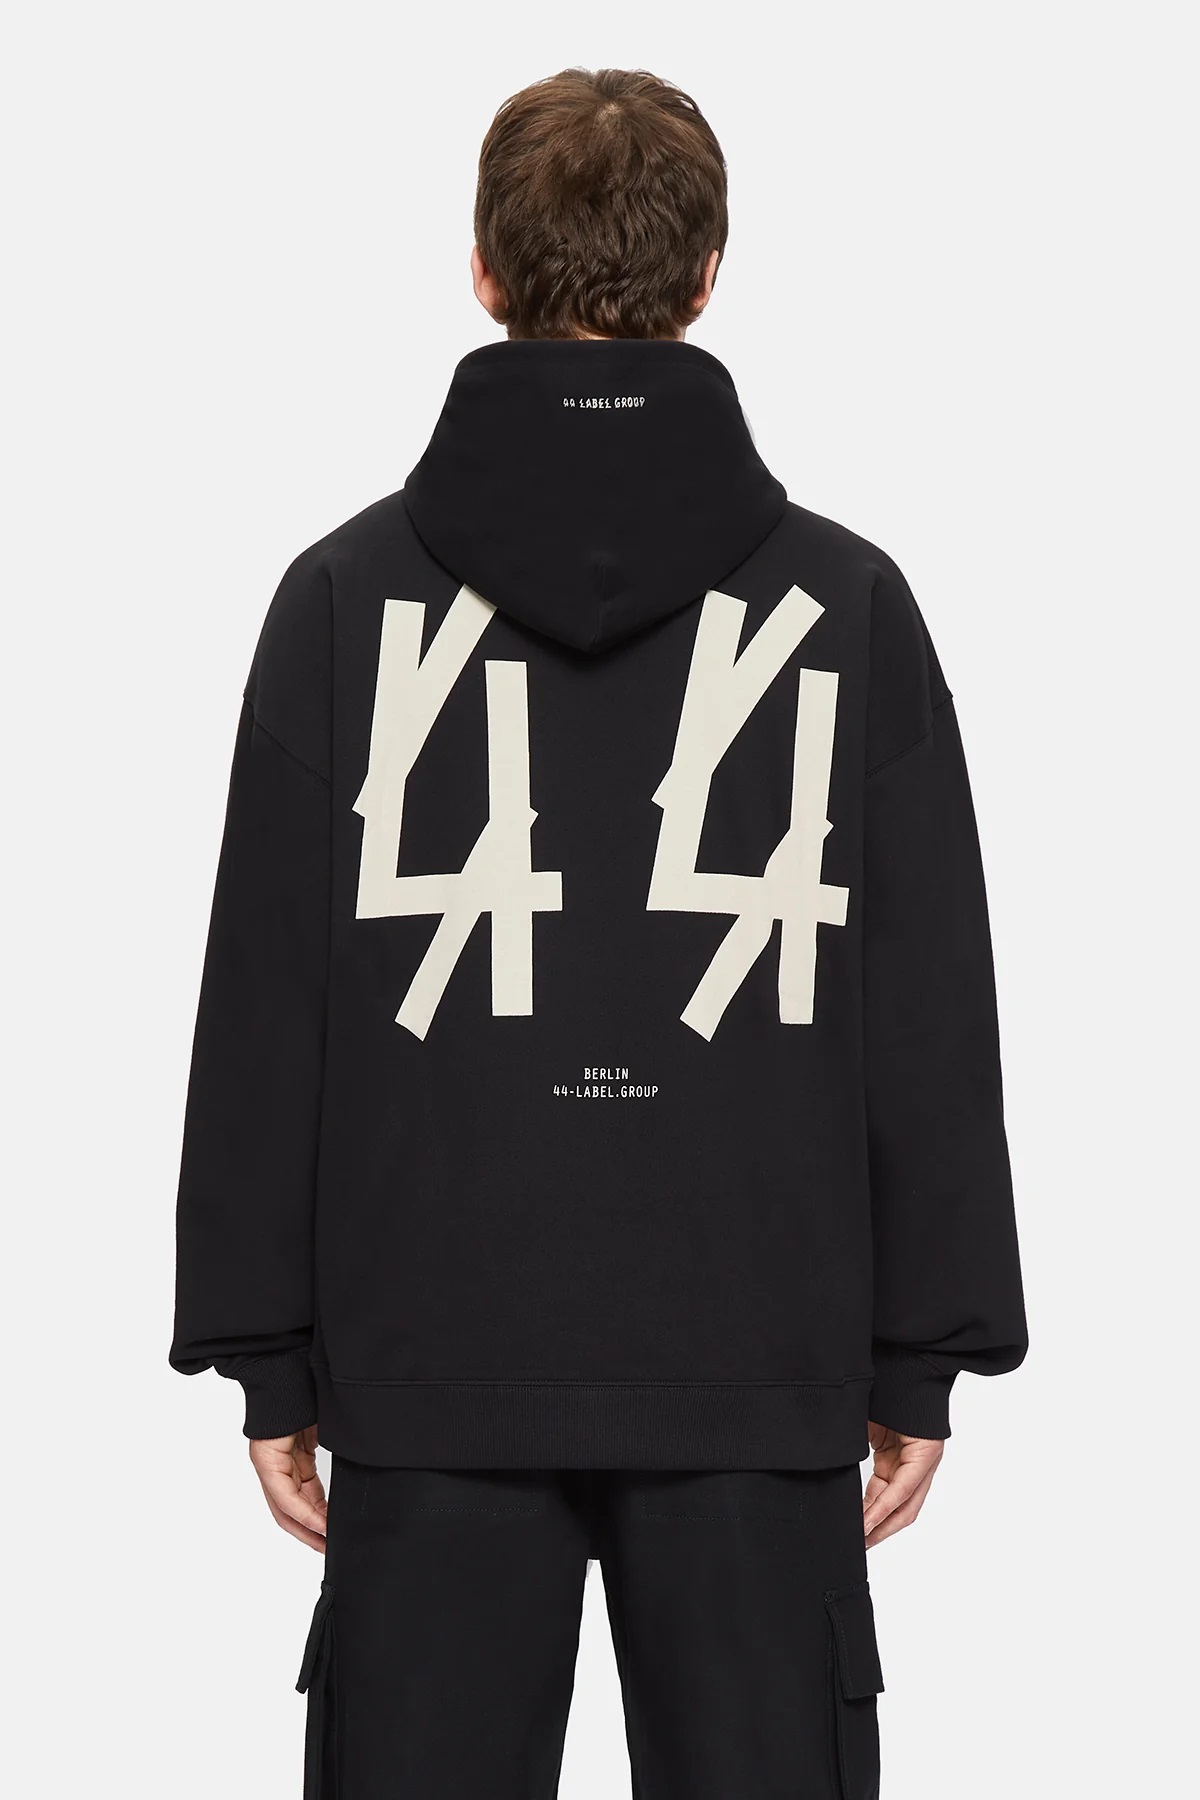 44 LABEL GROUP New Classic Hoodie in Black/Dirty White S